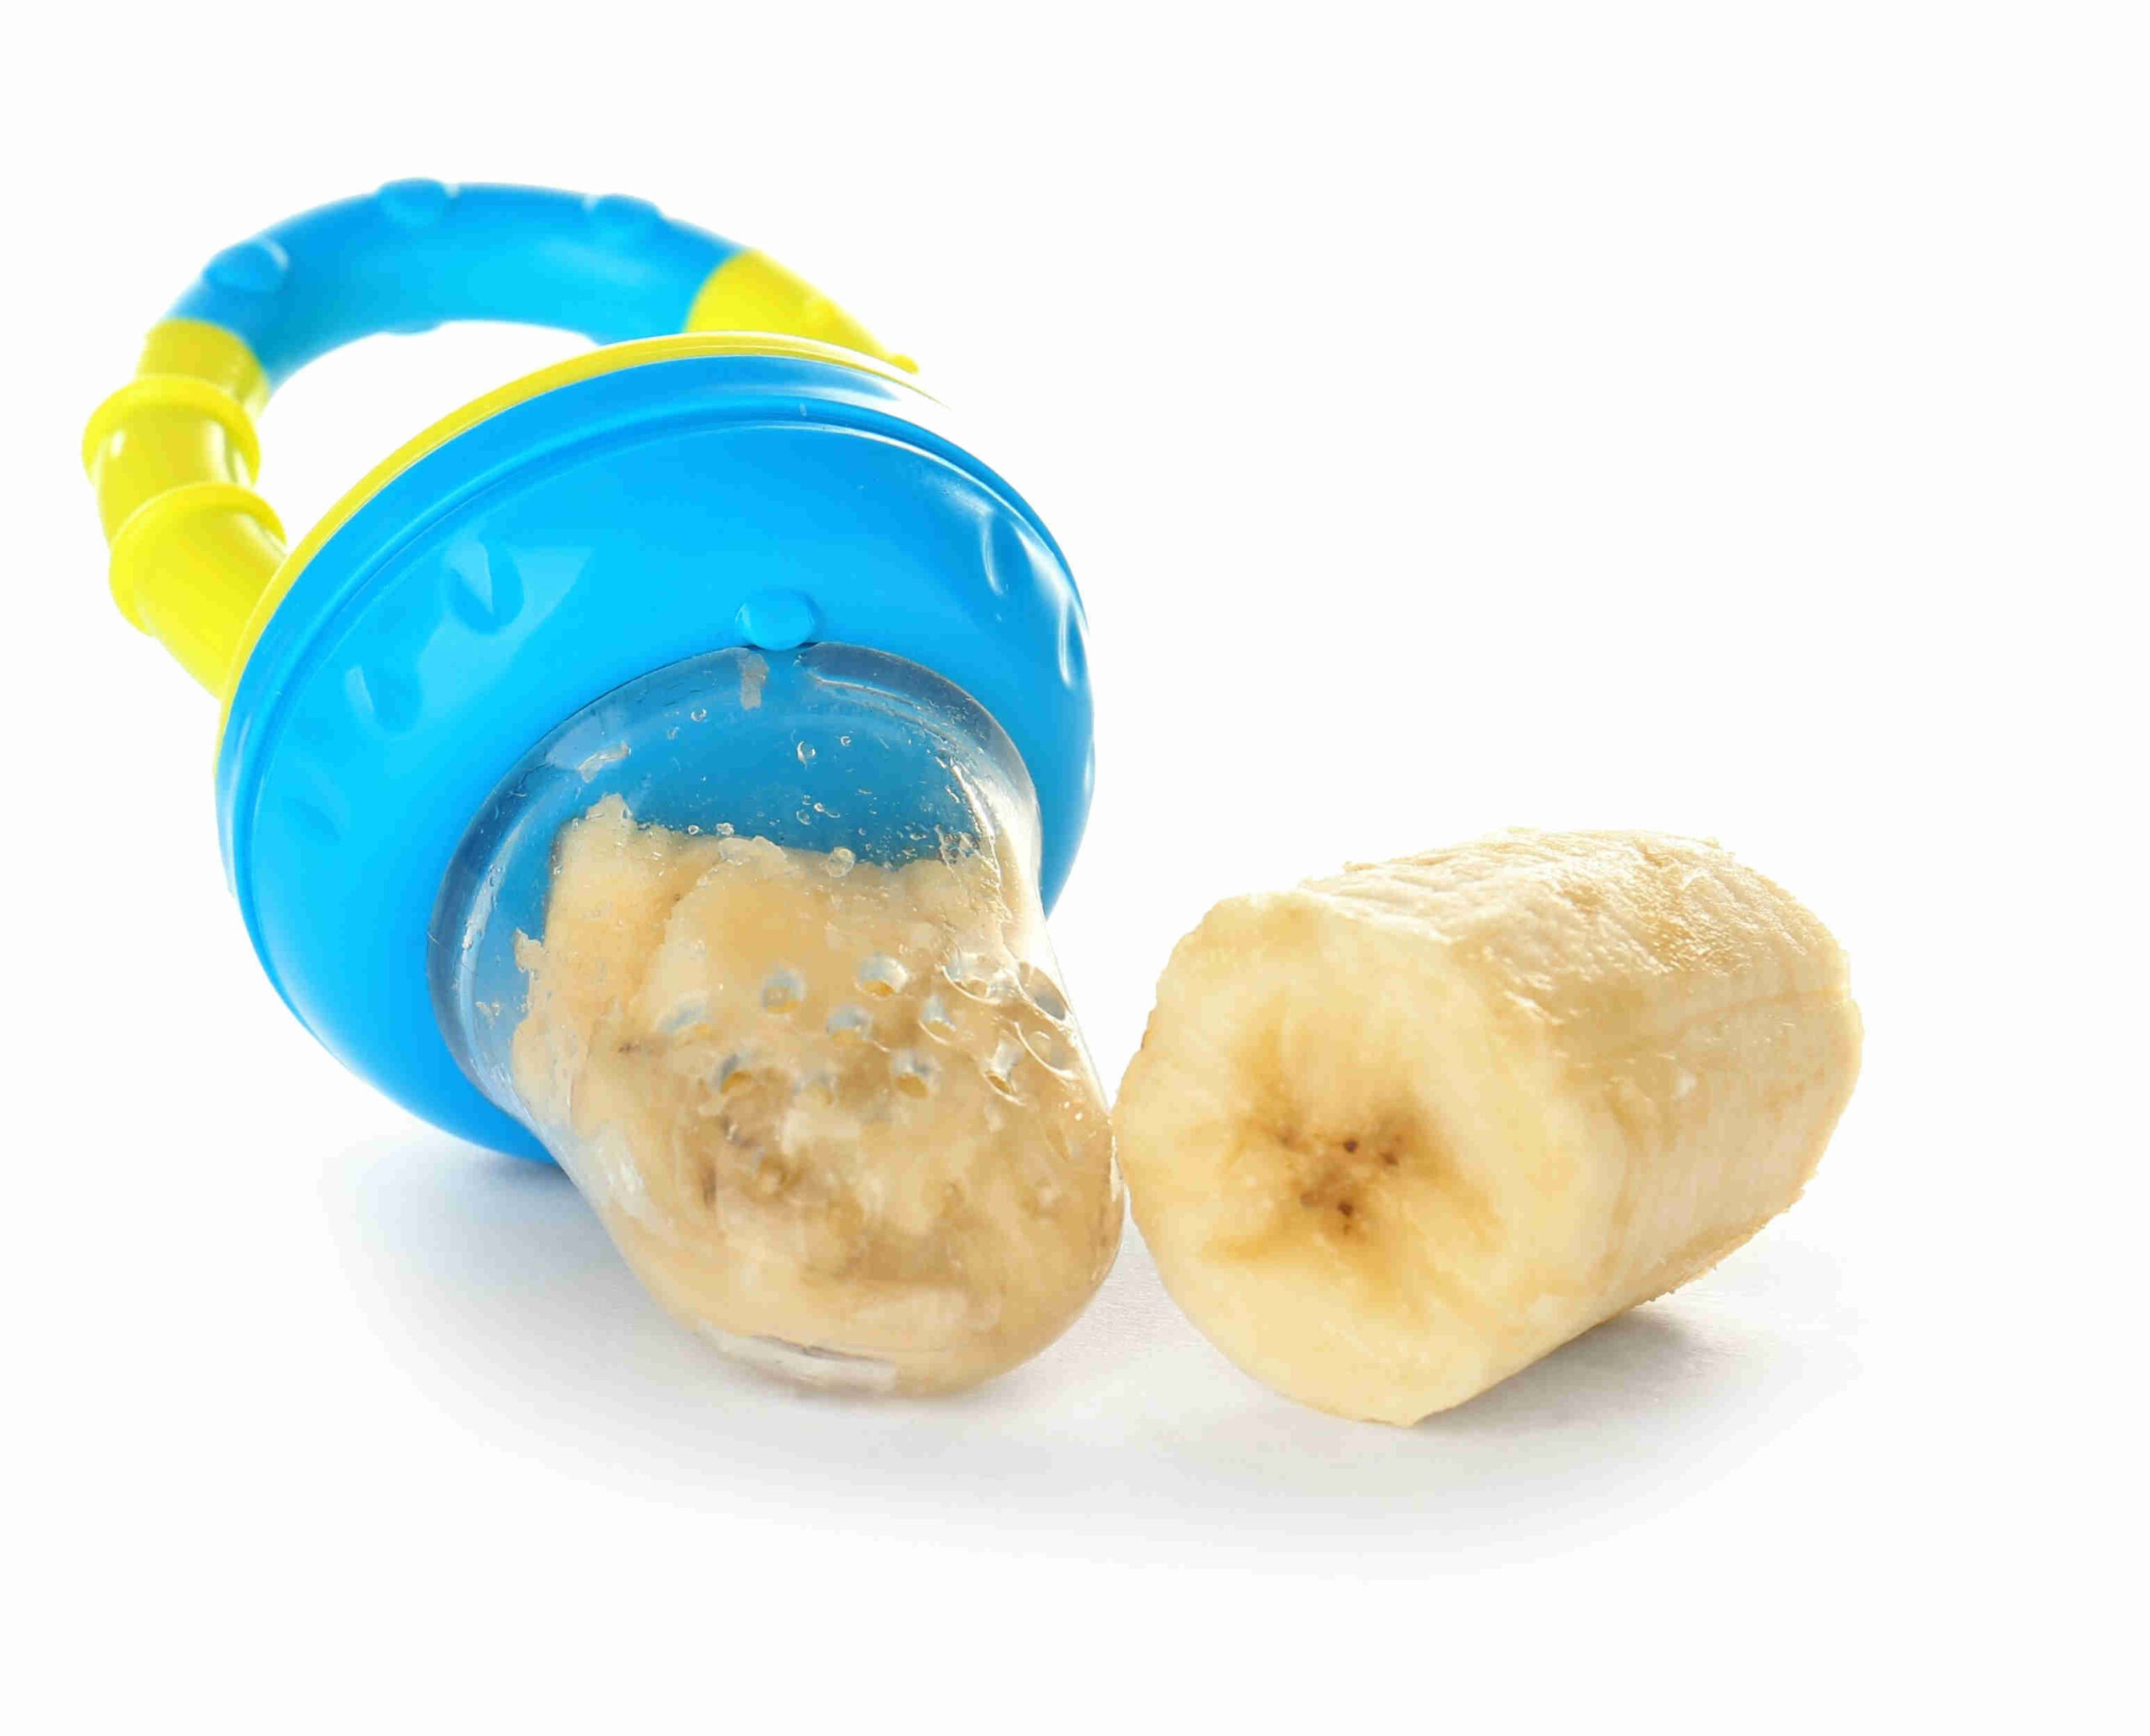 Baby feeder with frozen banana for teething baby.